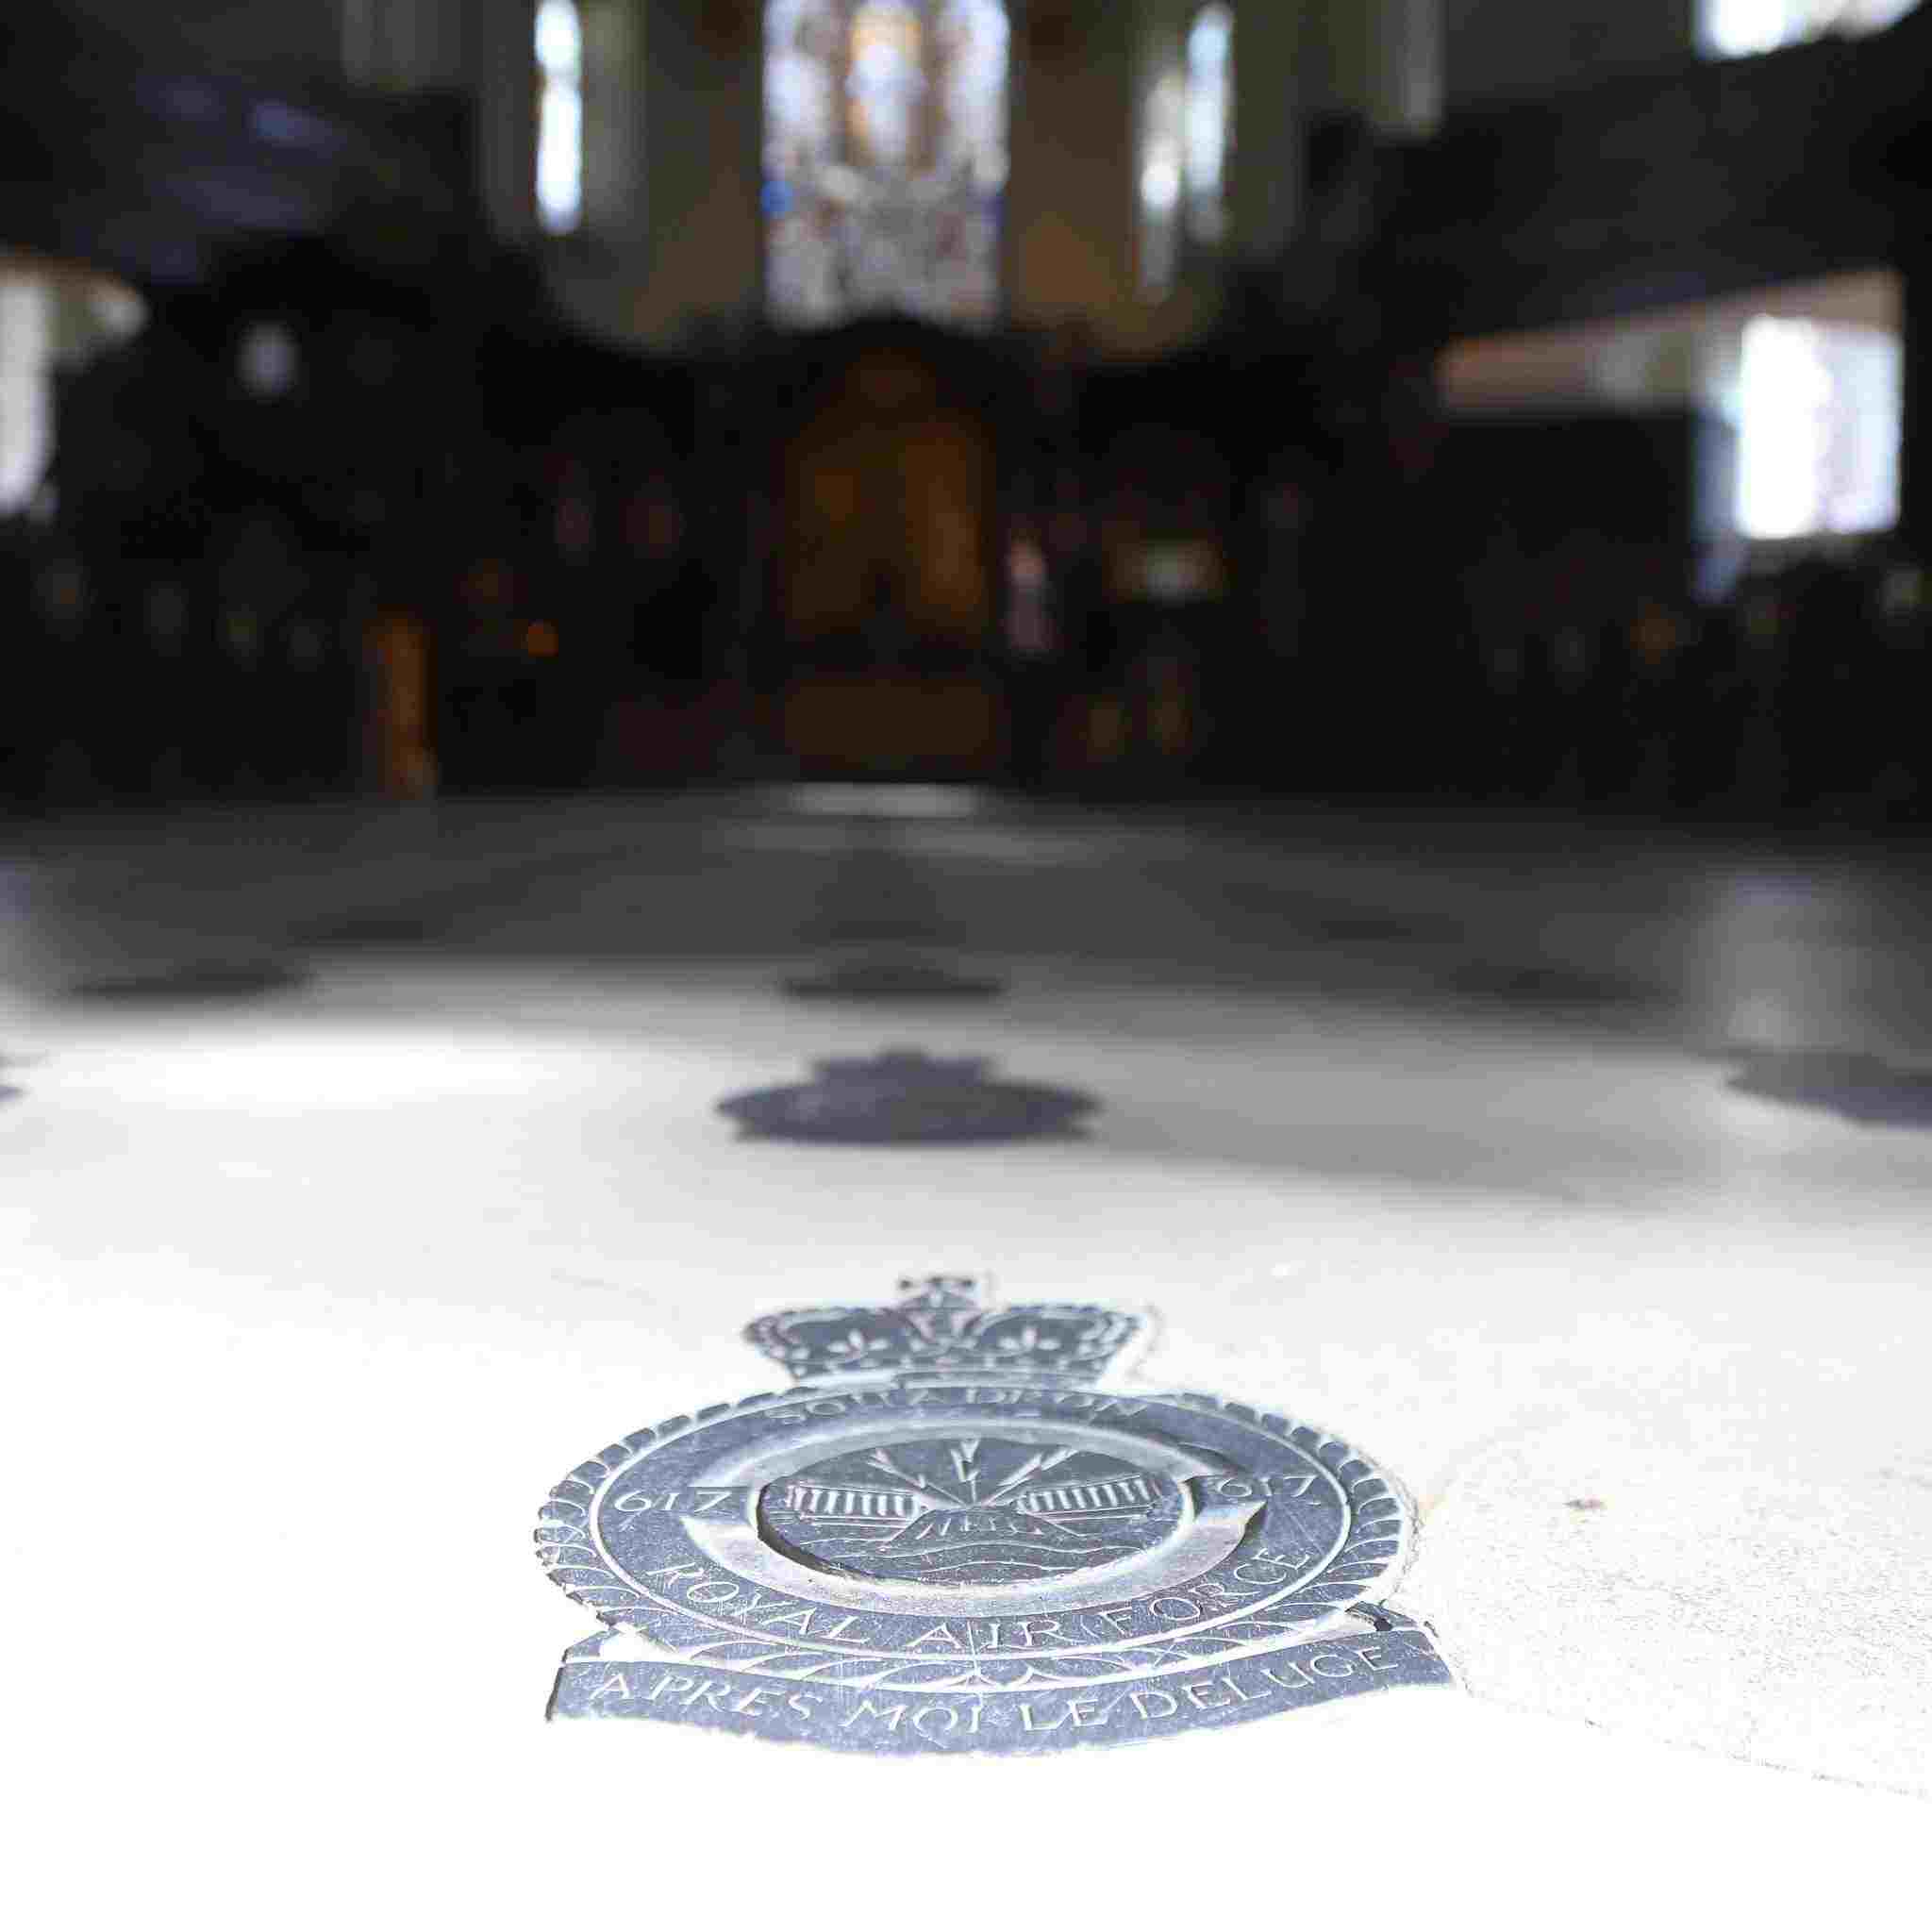 617 squadron badge - The Dambusters - set into the floor of St Clement Danes church in The Strand, London. Central Church of the RAF. 23-Sep-2023.